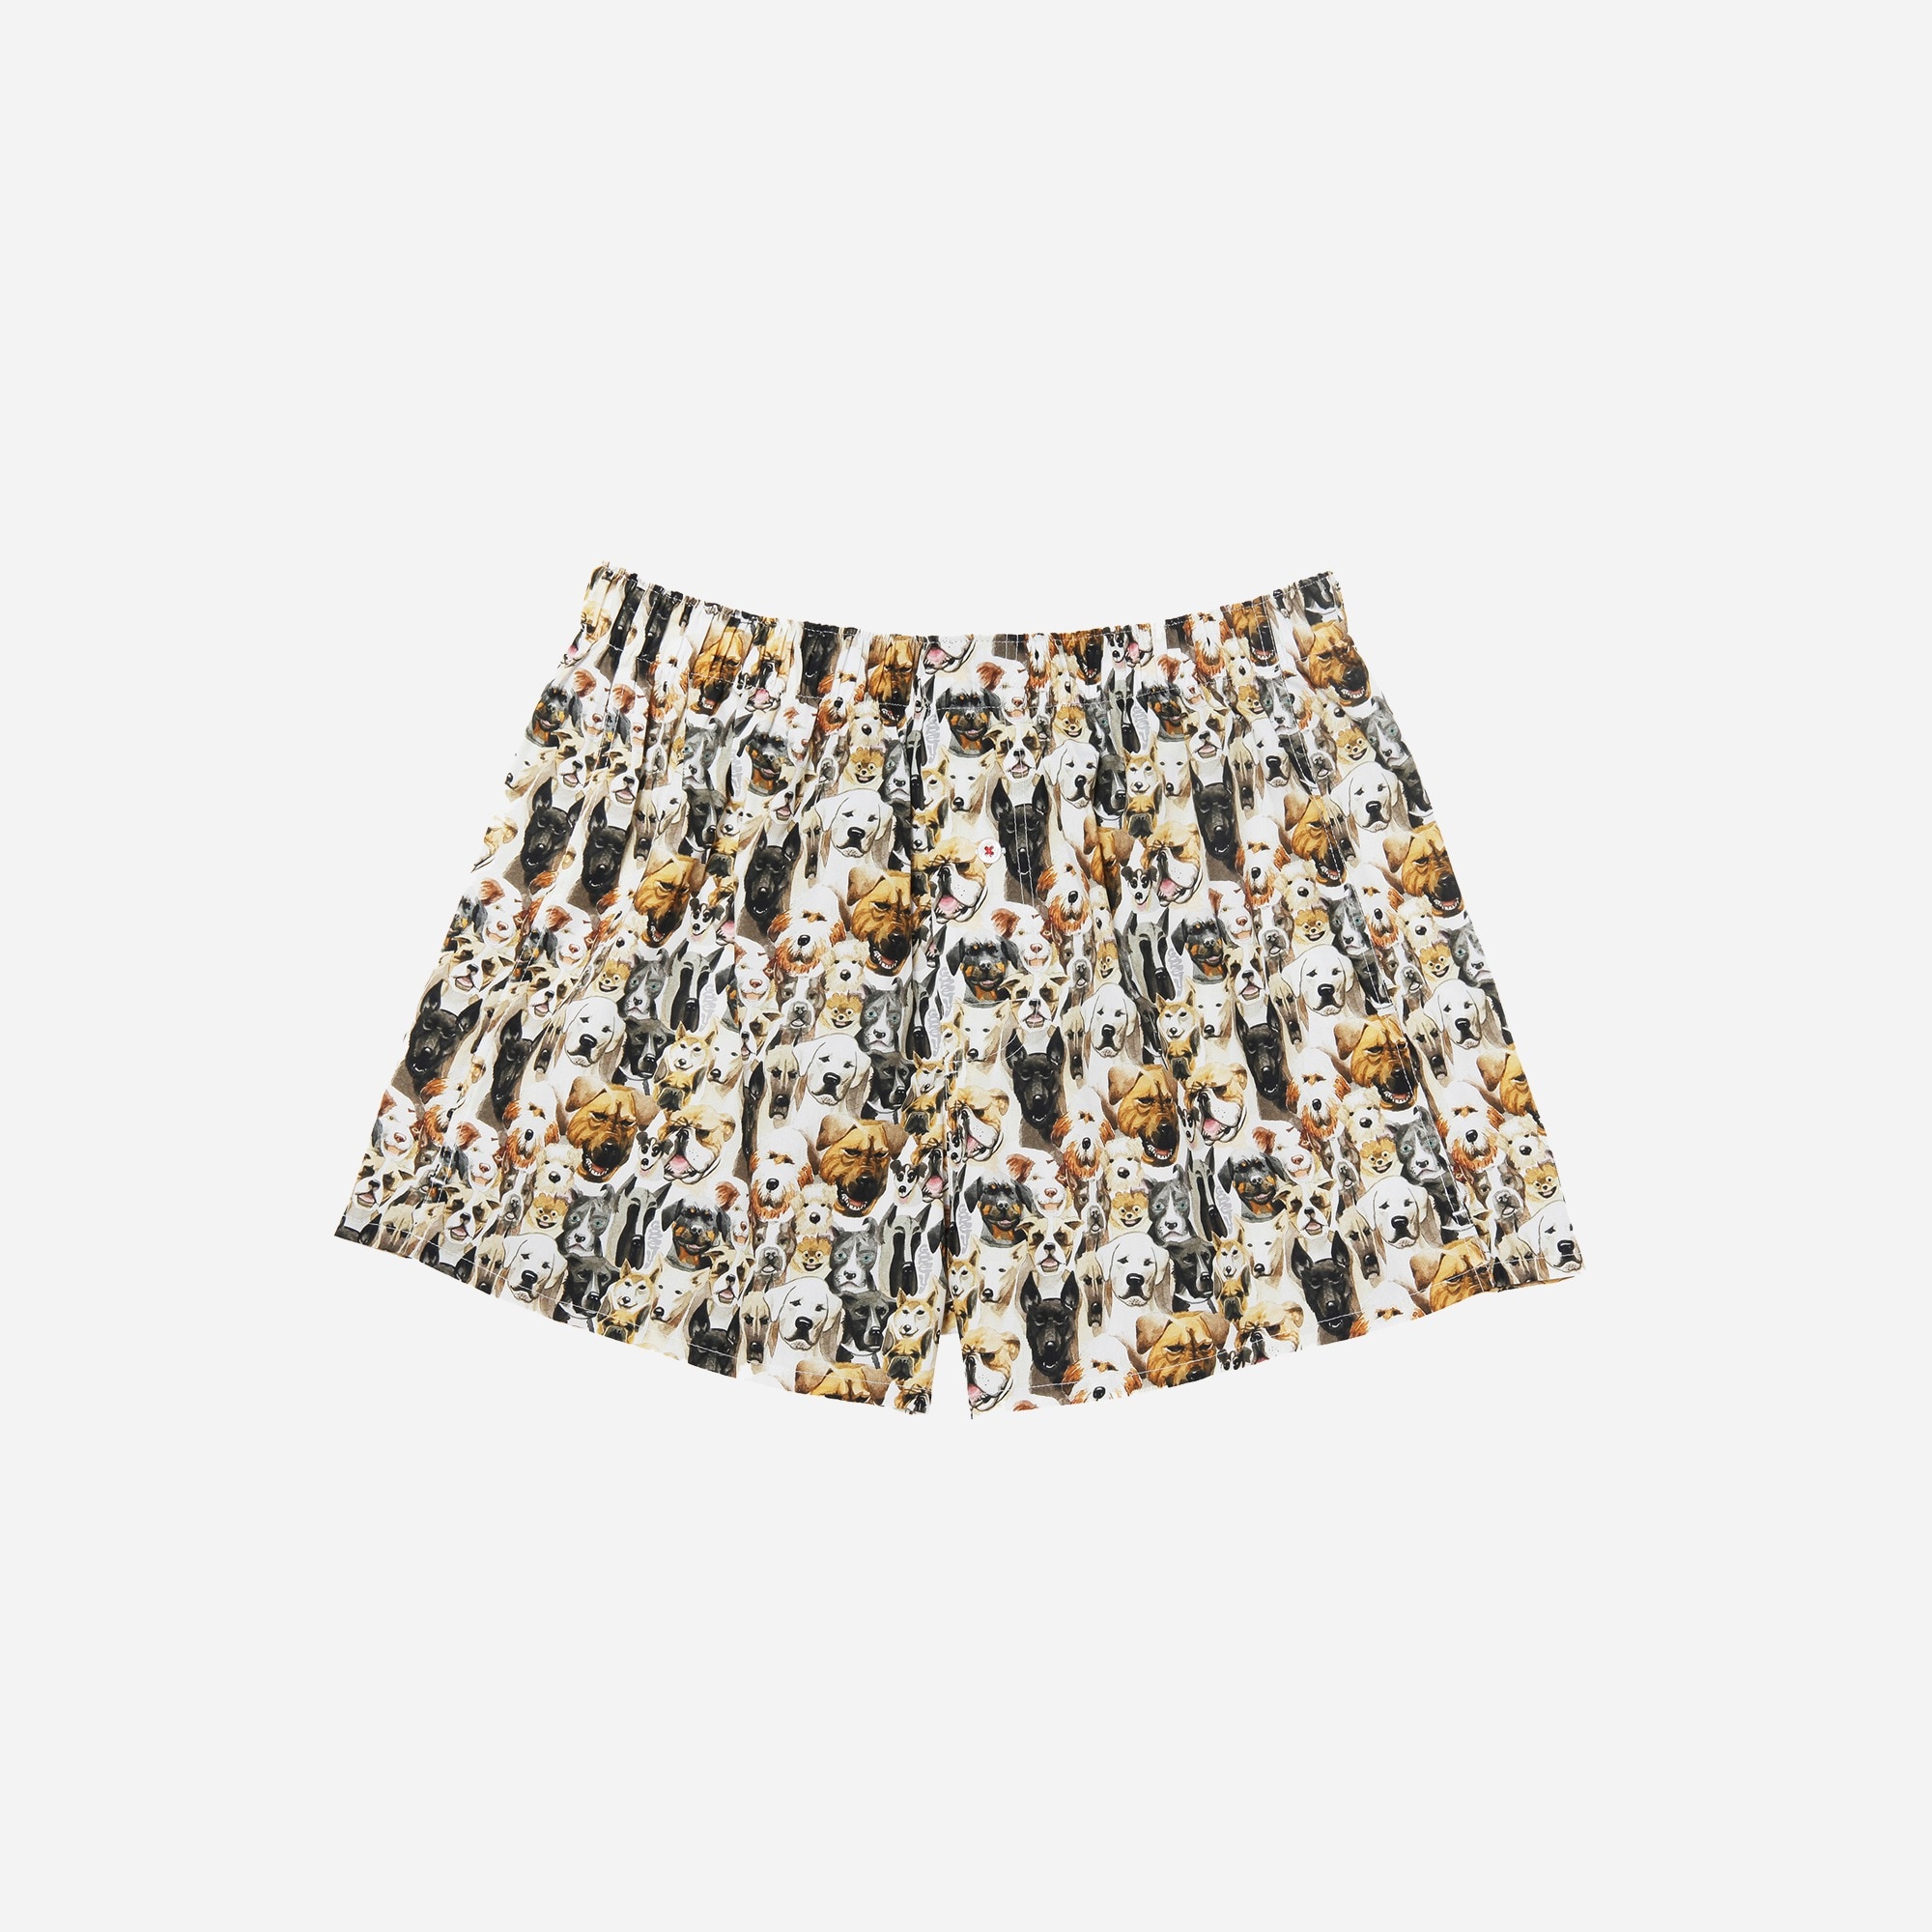  Druthers™ organic cotton boxers